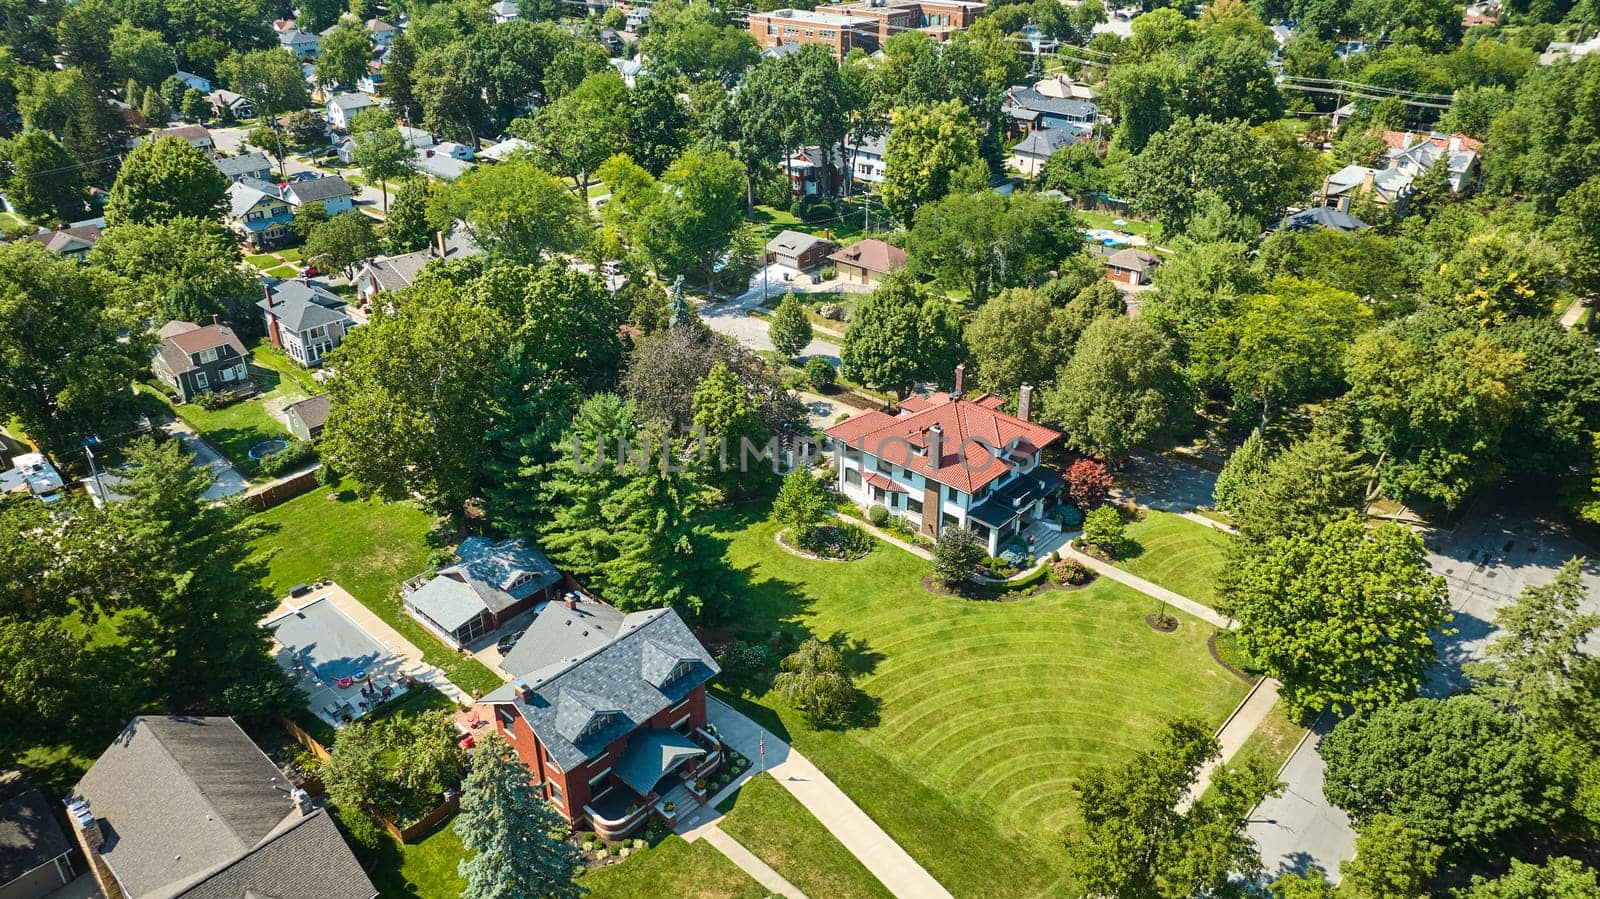 Image of Aerial houses and homes in old neighborhood located near Lakeside Park